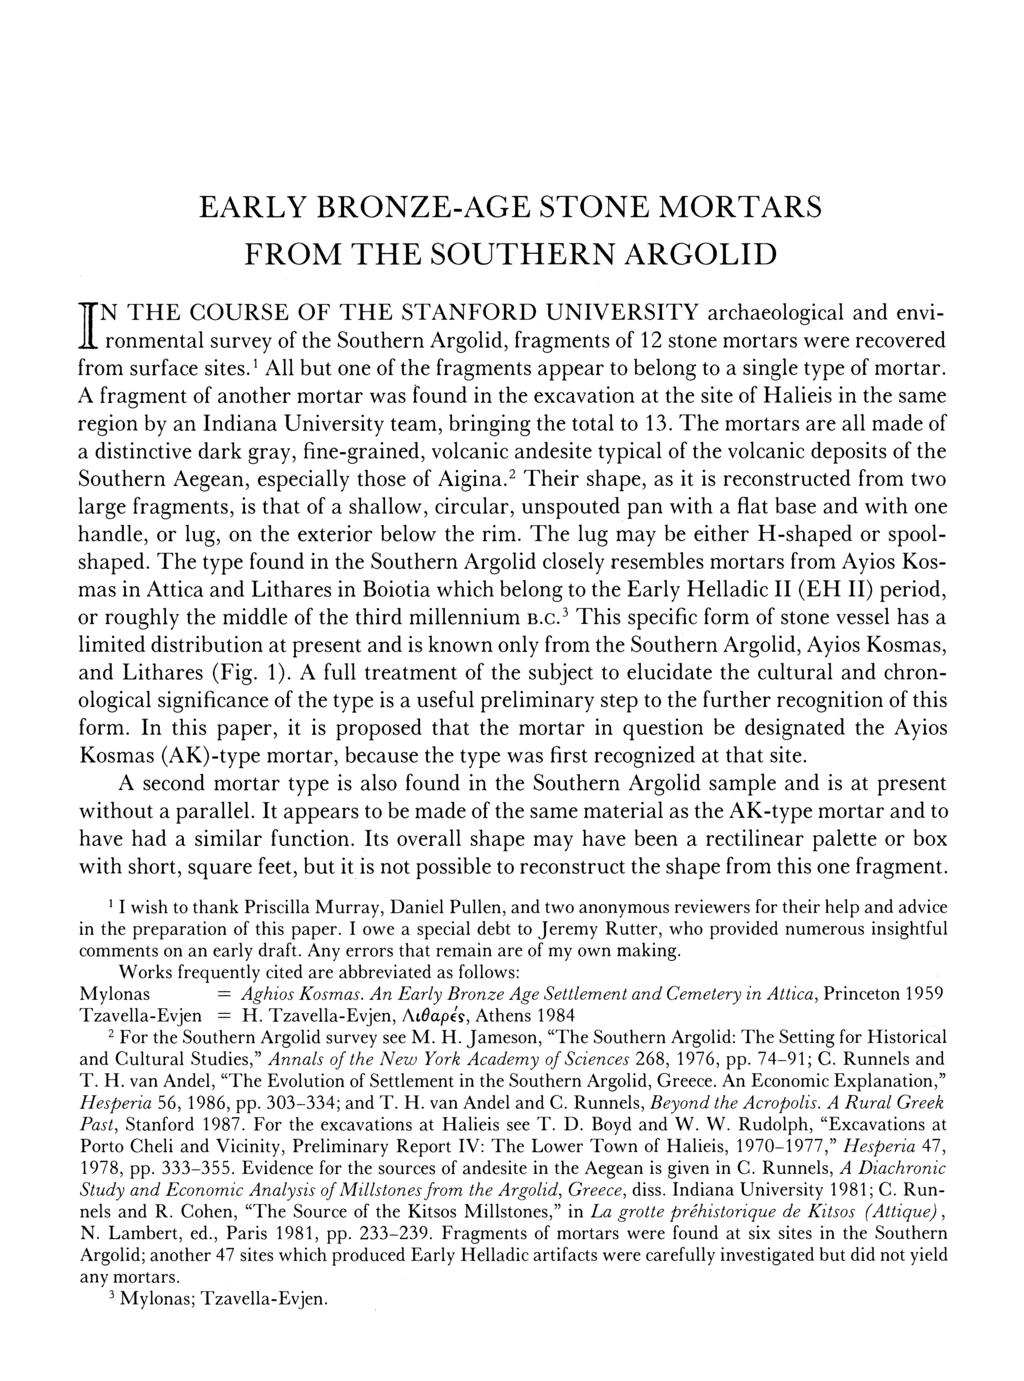 EARLY BRONZE-AGE STONE MORTARS FROM THE SOUTHERN ARGOLID N THE COURSE OF THE STANFORD UNIVERSITY archaeological and environmental survey of the Southern Argolid, fragments of 12 stone mortars were